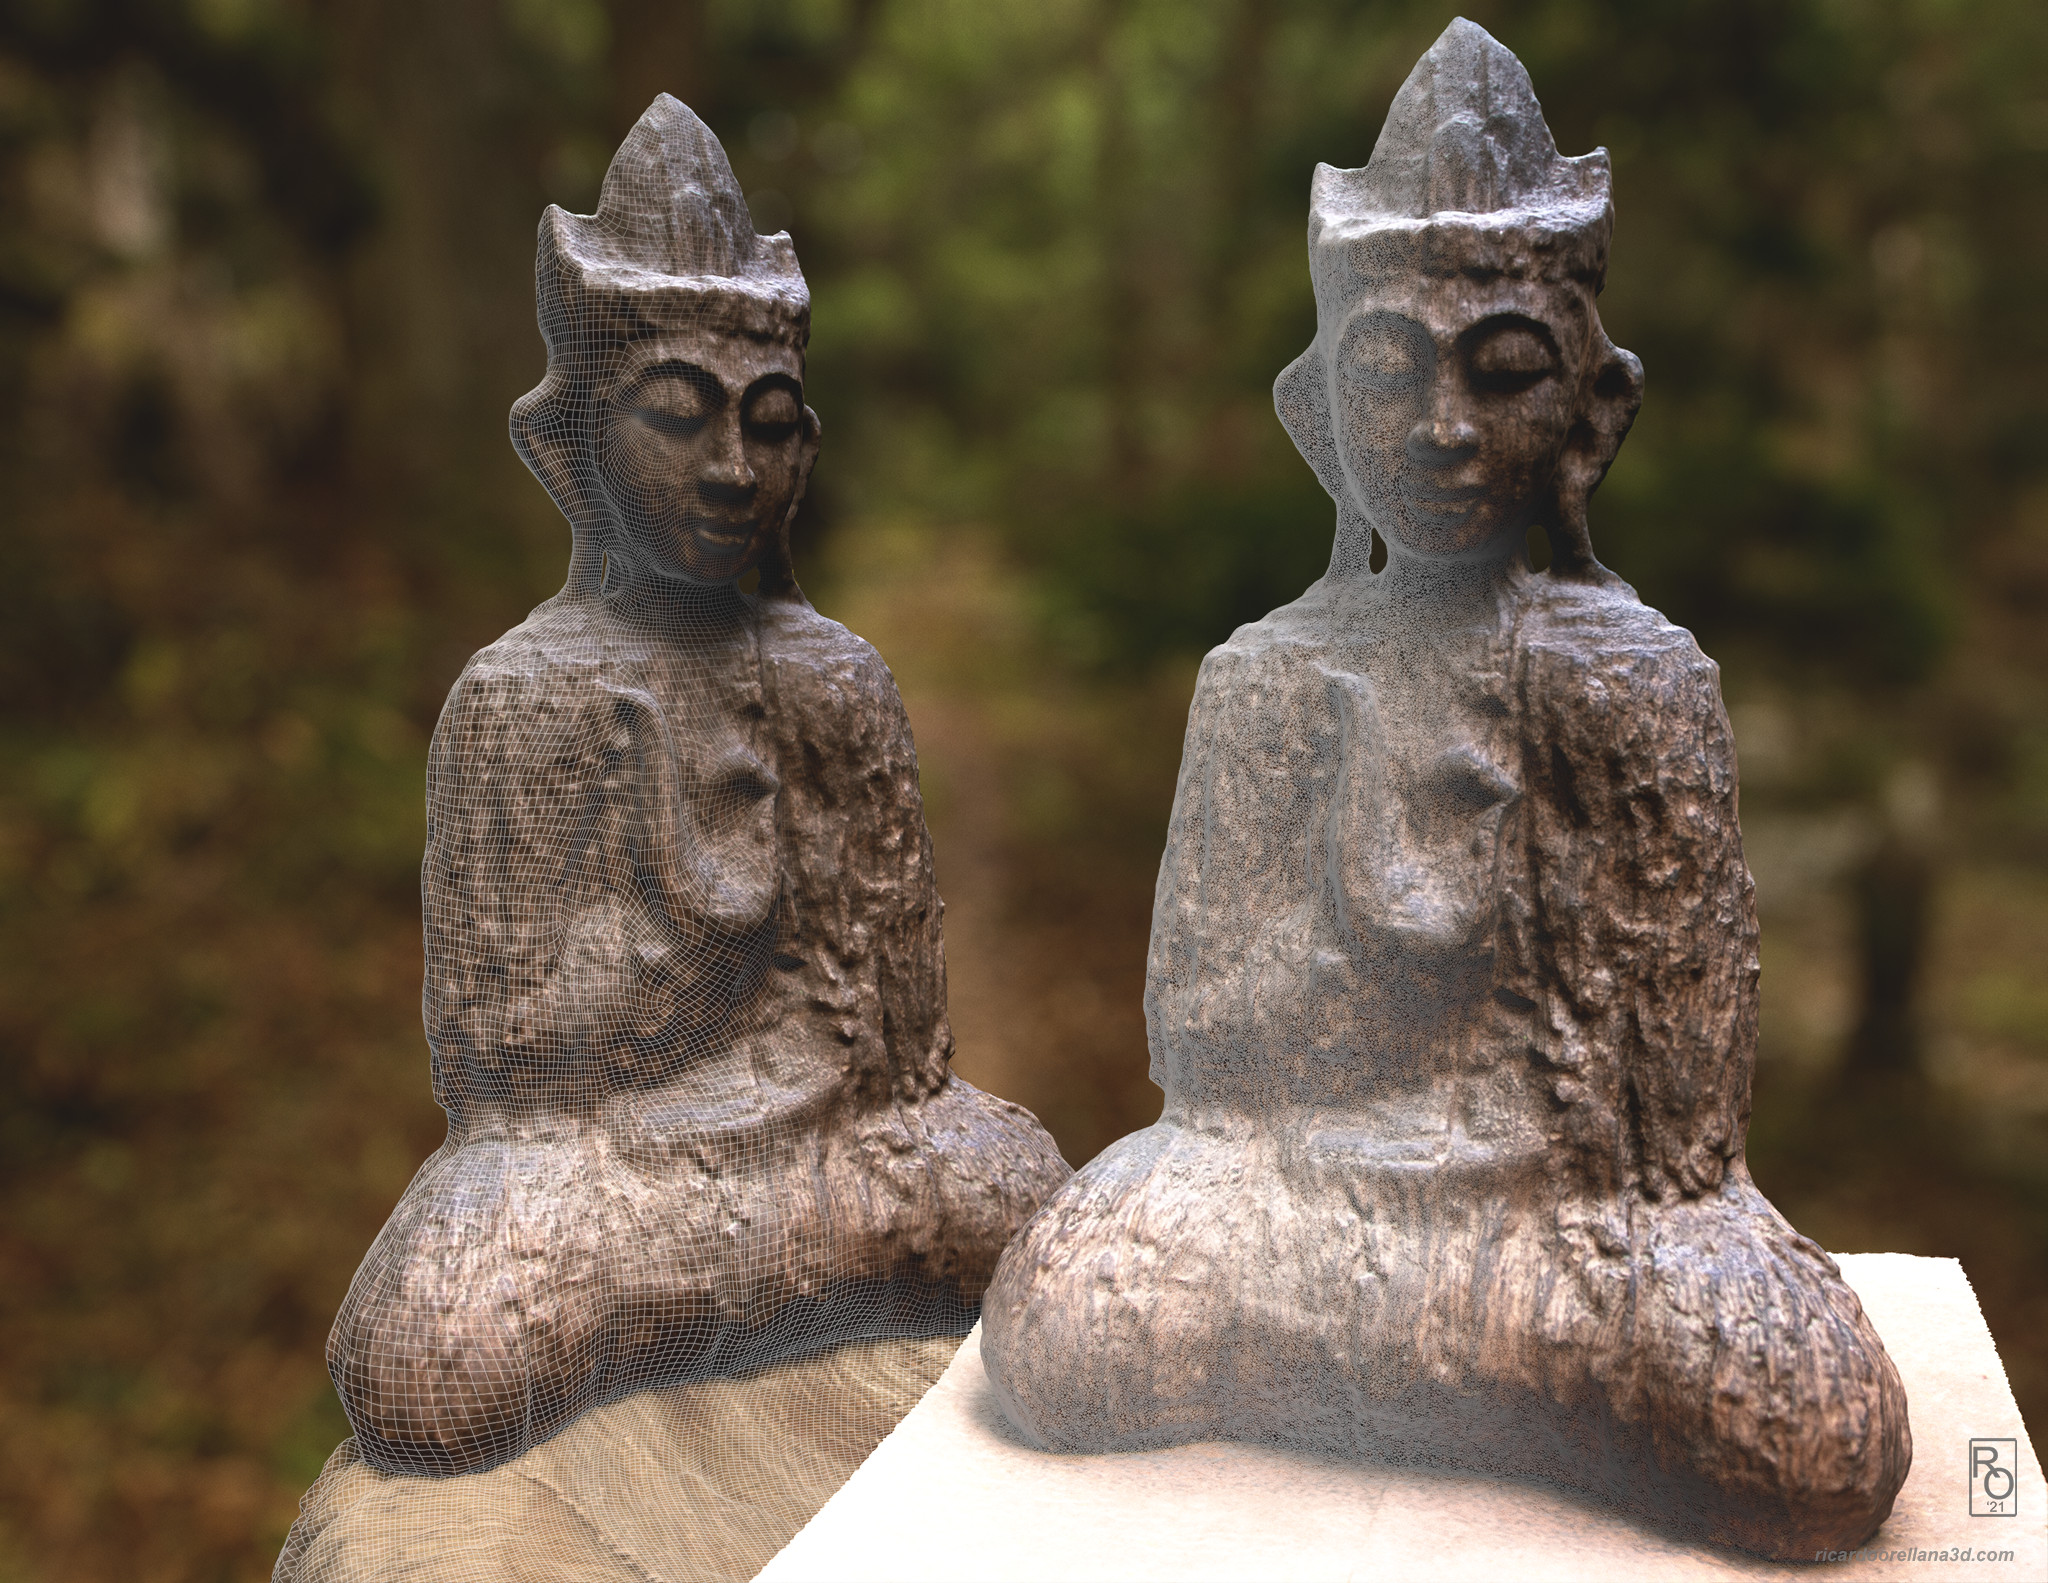 Side by Side comparison between the original scan and the reconstructed mesh